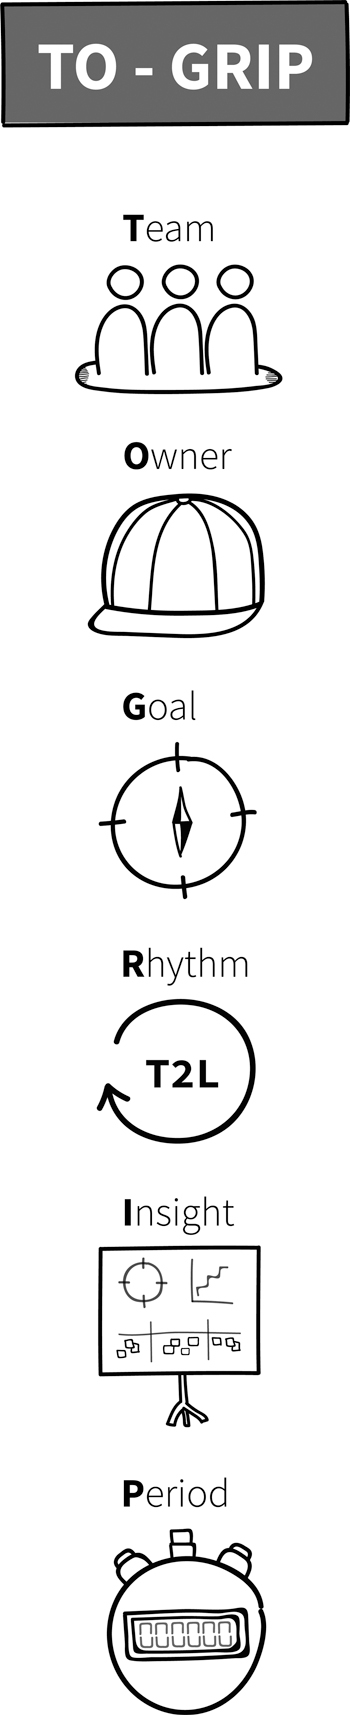 A figure shows the six components of "TO-GRIP" as follows. Team, Owner, Goal, Rhythm, Insight, and Period."